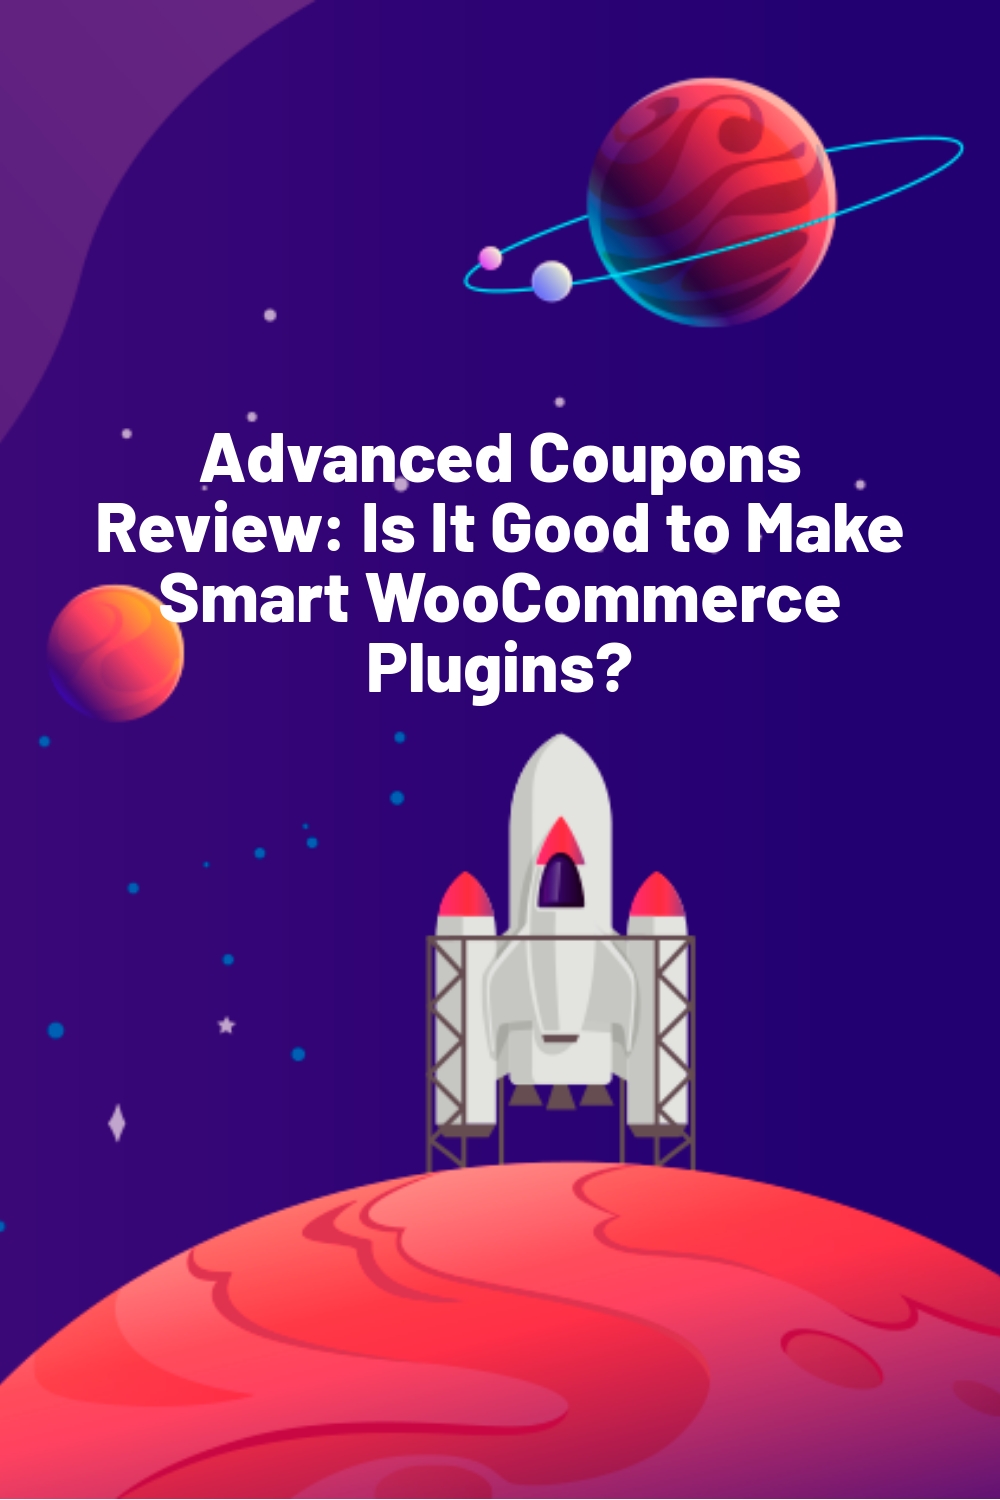 Advanced Coupons Review: Is It Good to Make Smart WooCommerce Plugins?